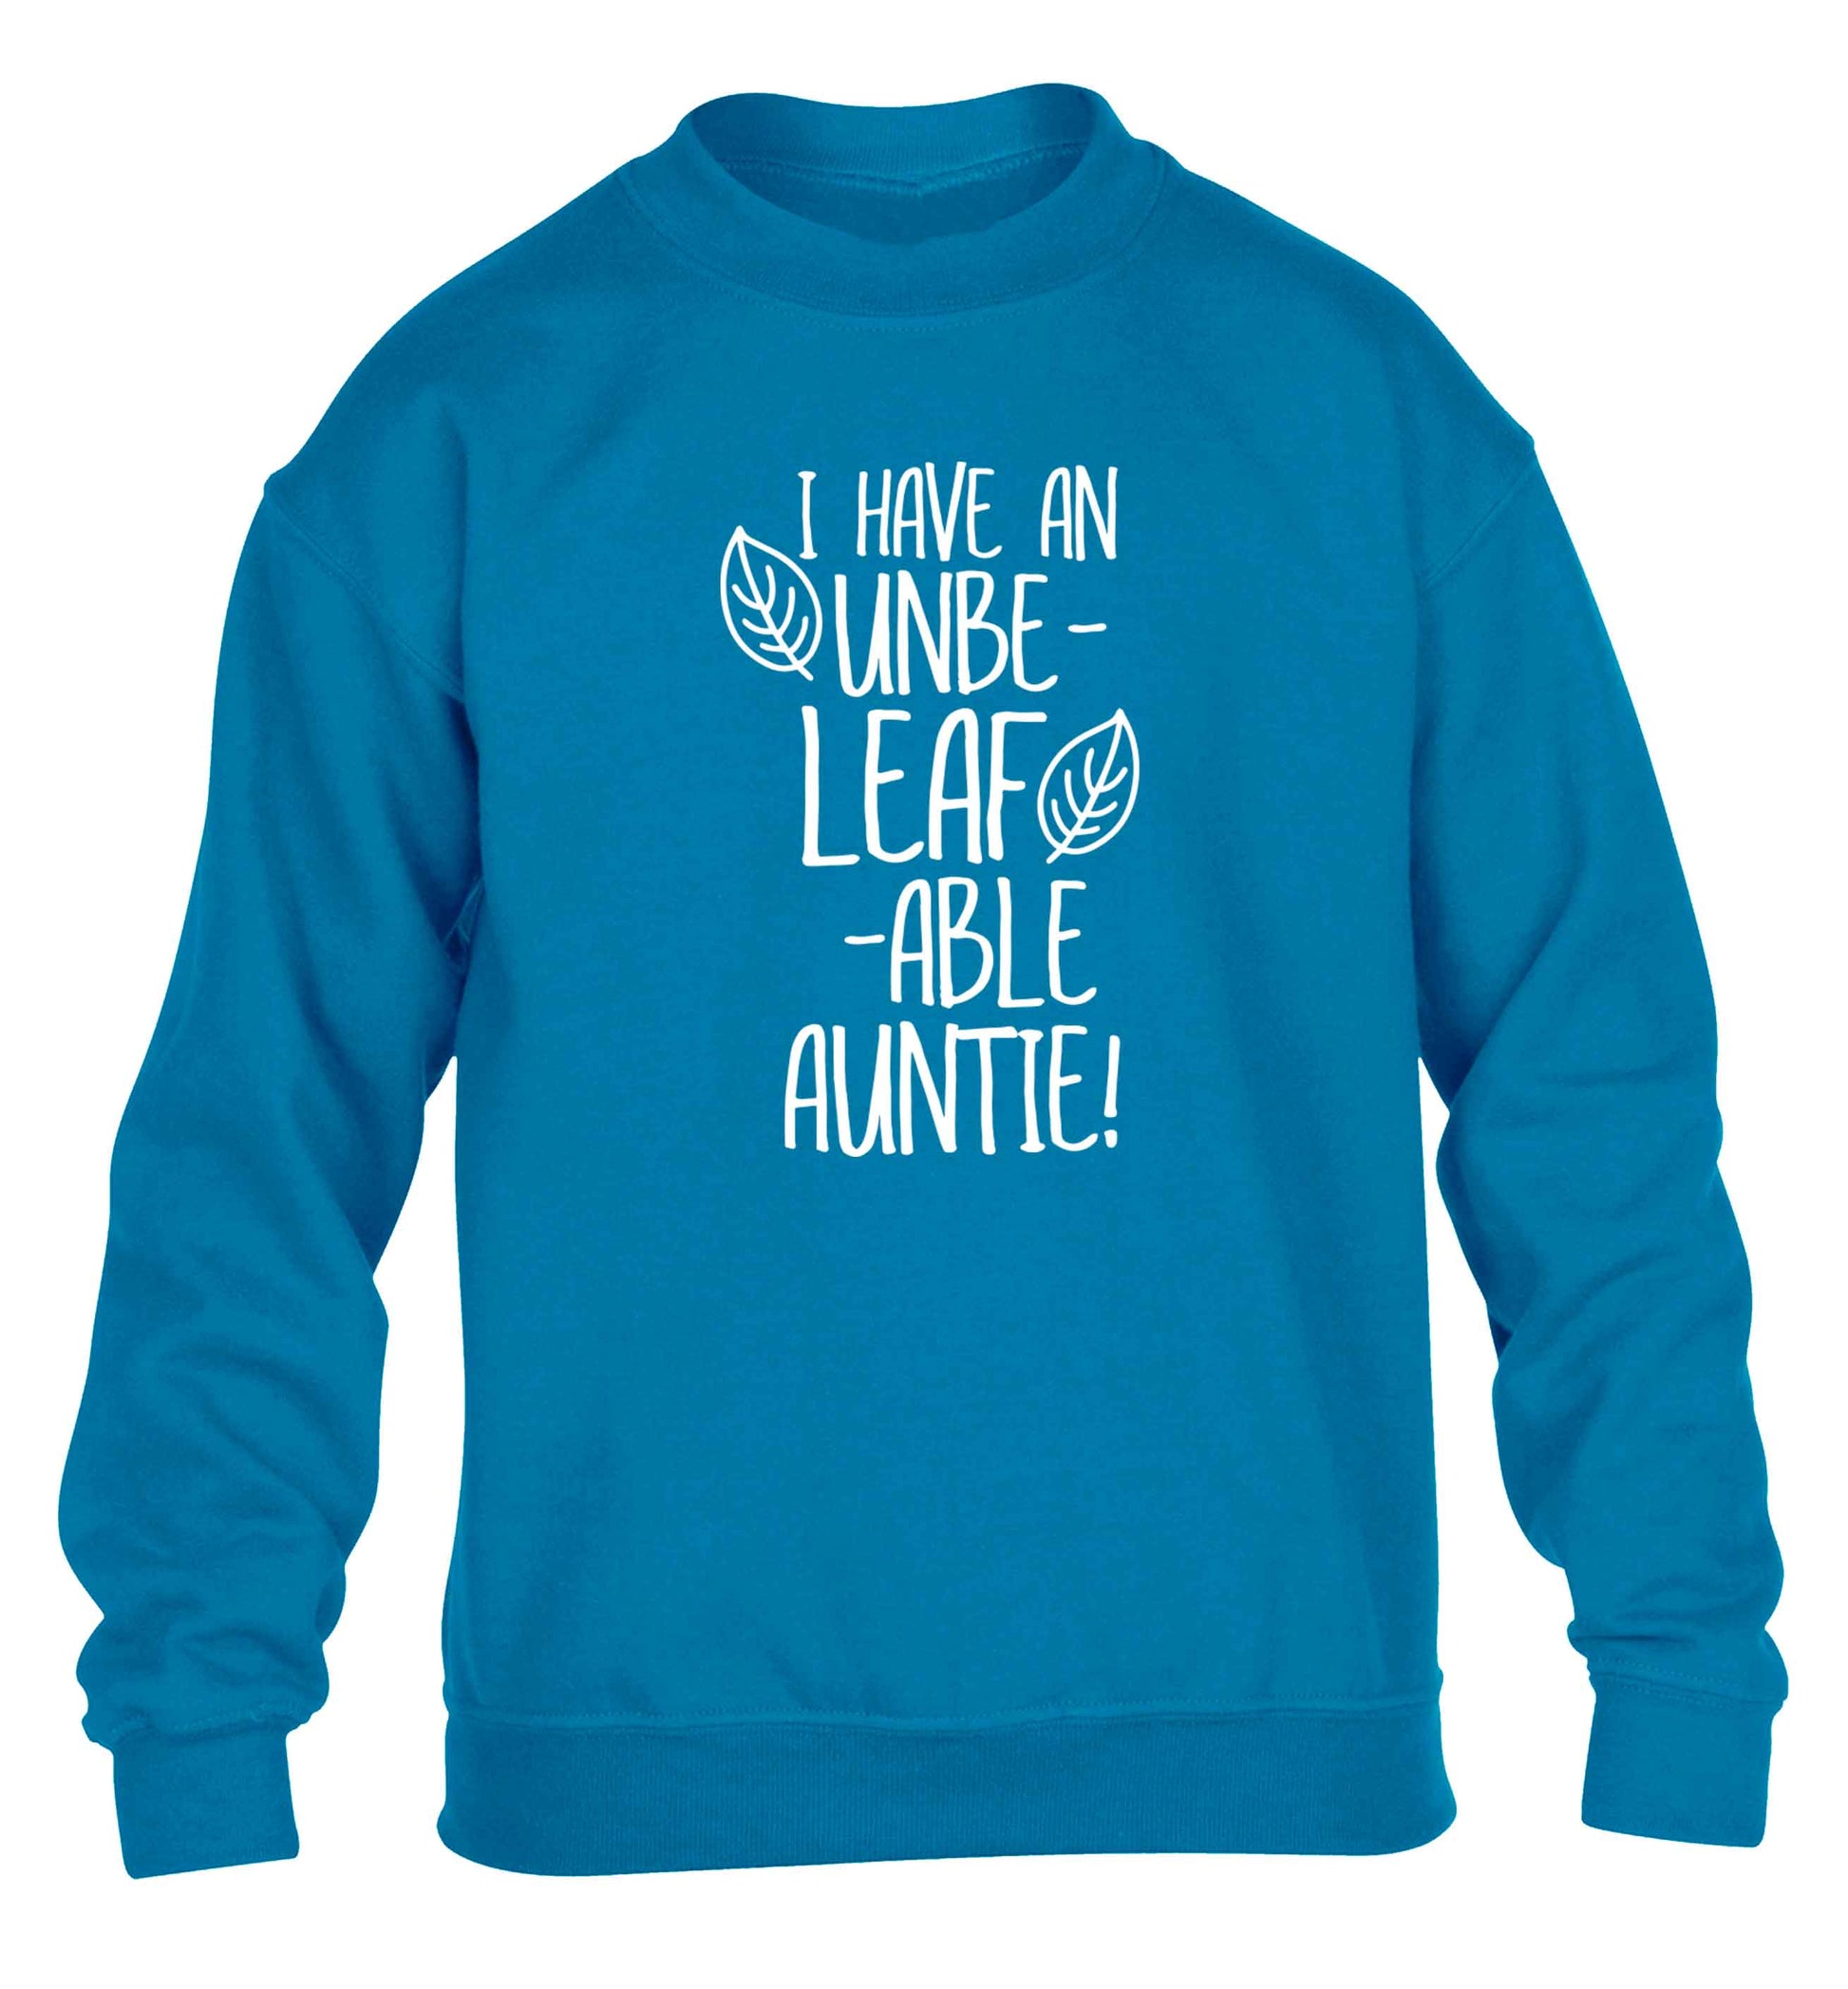 I have an unbe-leaf-able auntie children's blue sweater 12-13 Years